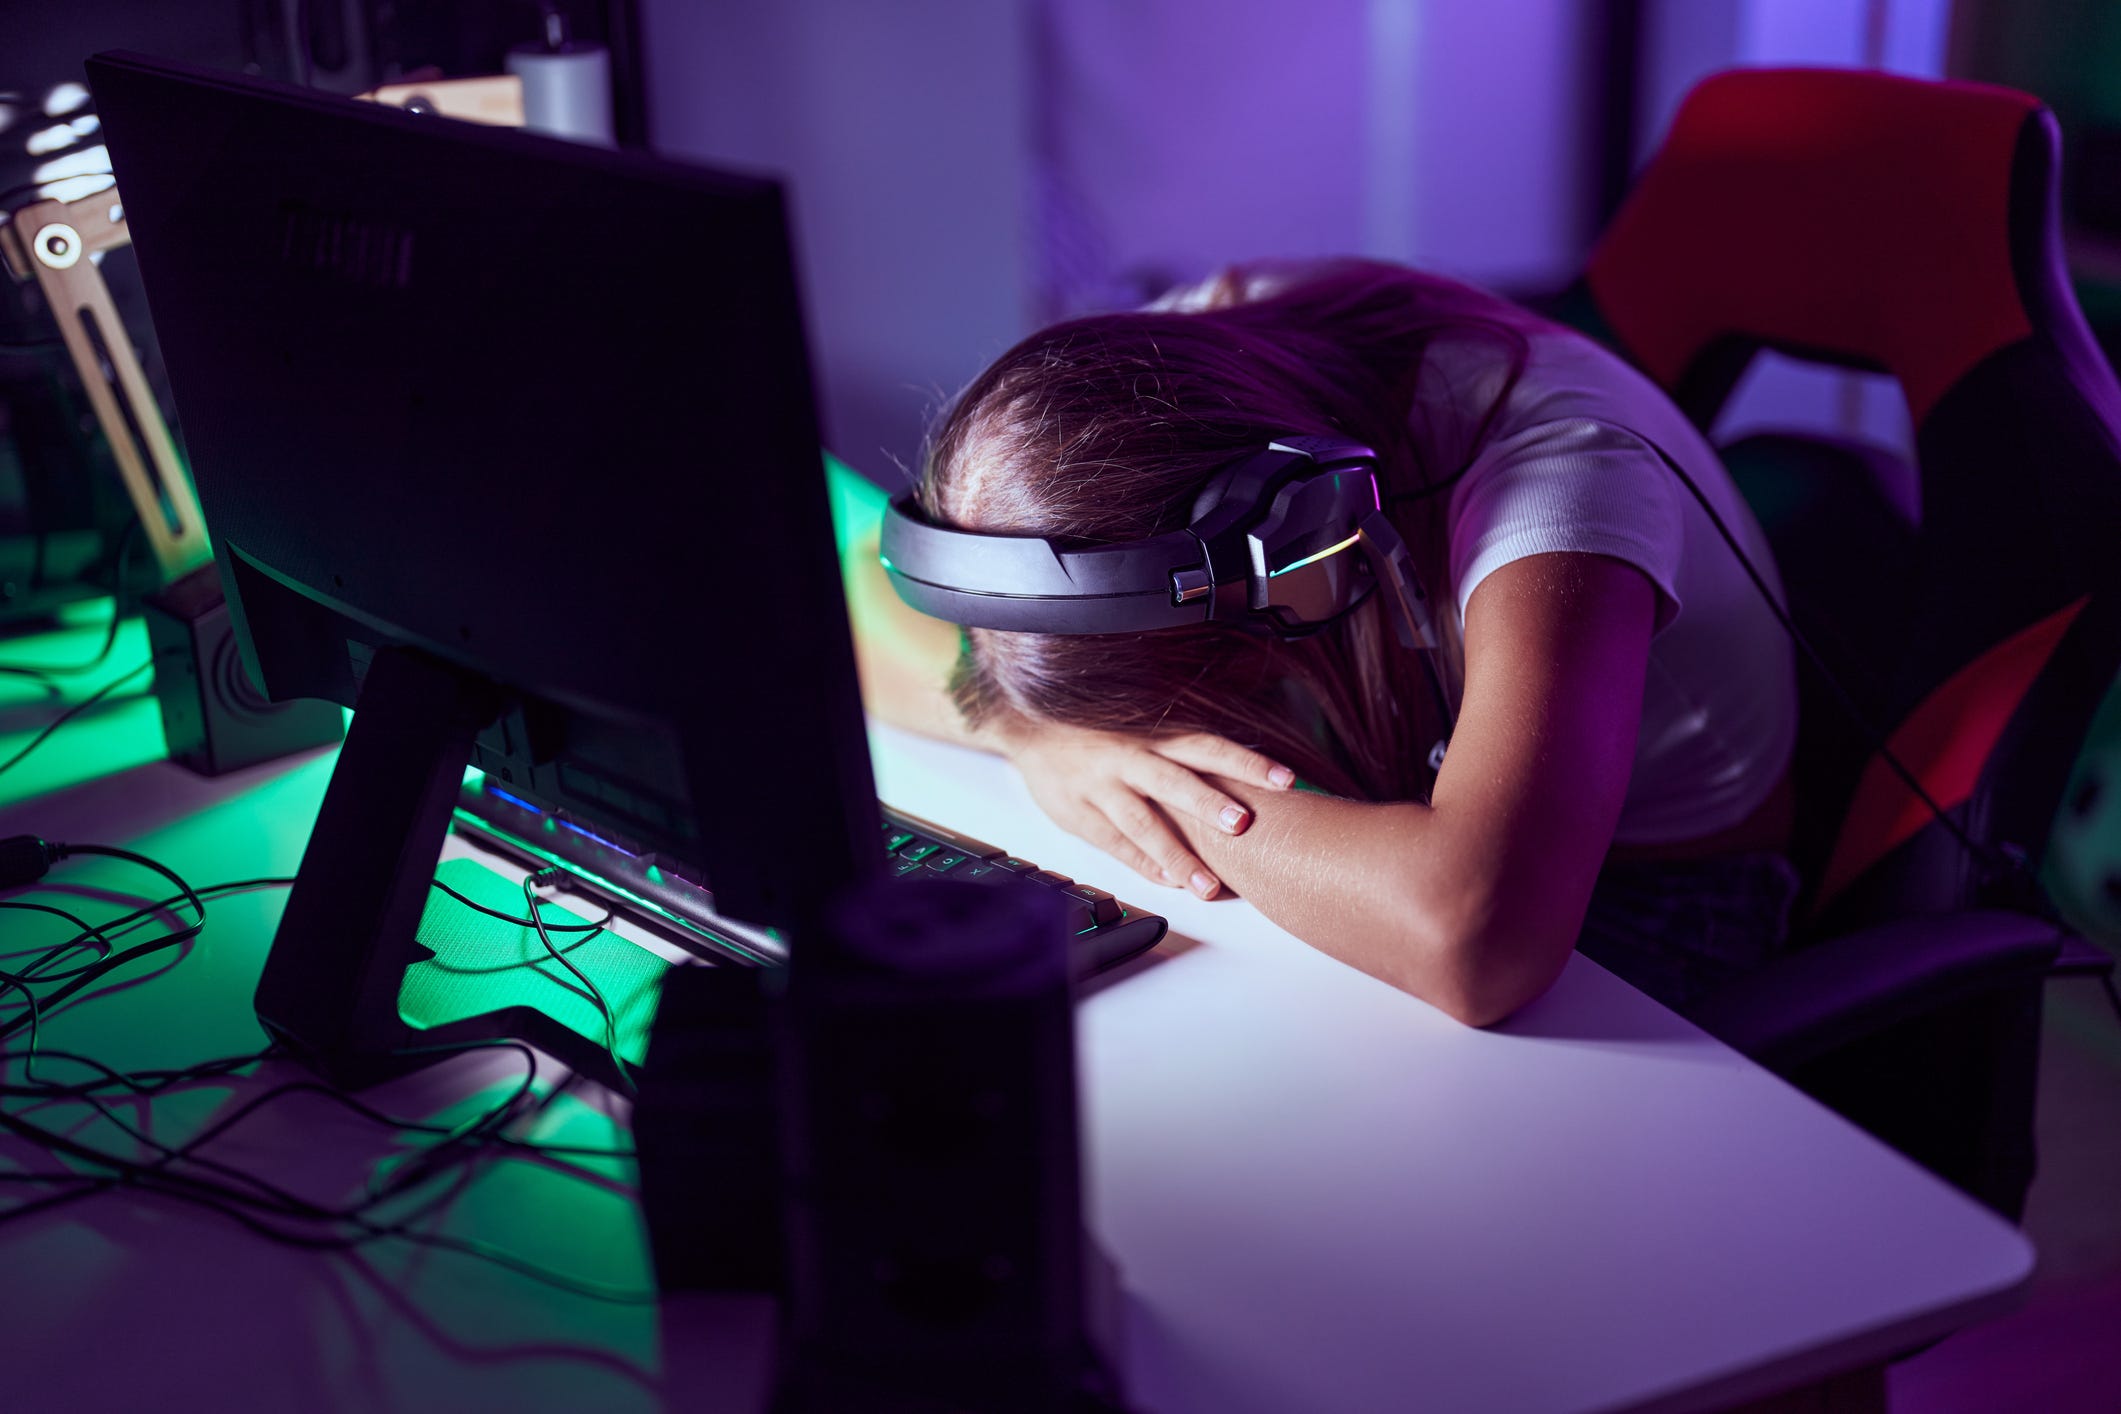 Wake up! Or, how to game when you're tired - by Daniel Noel